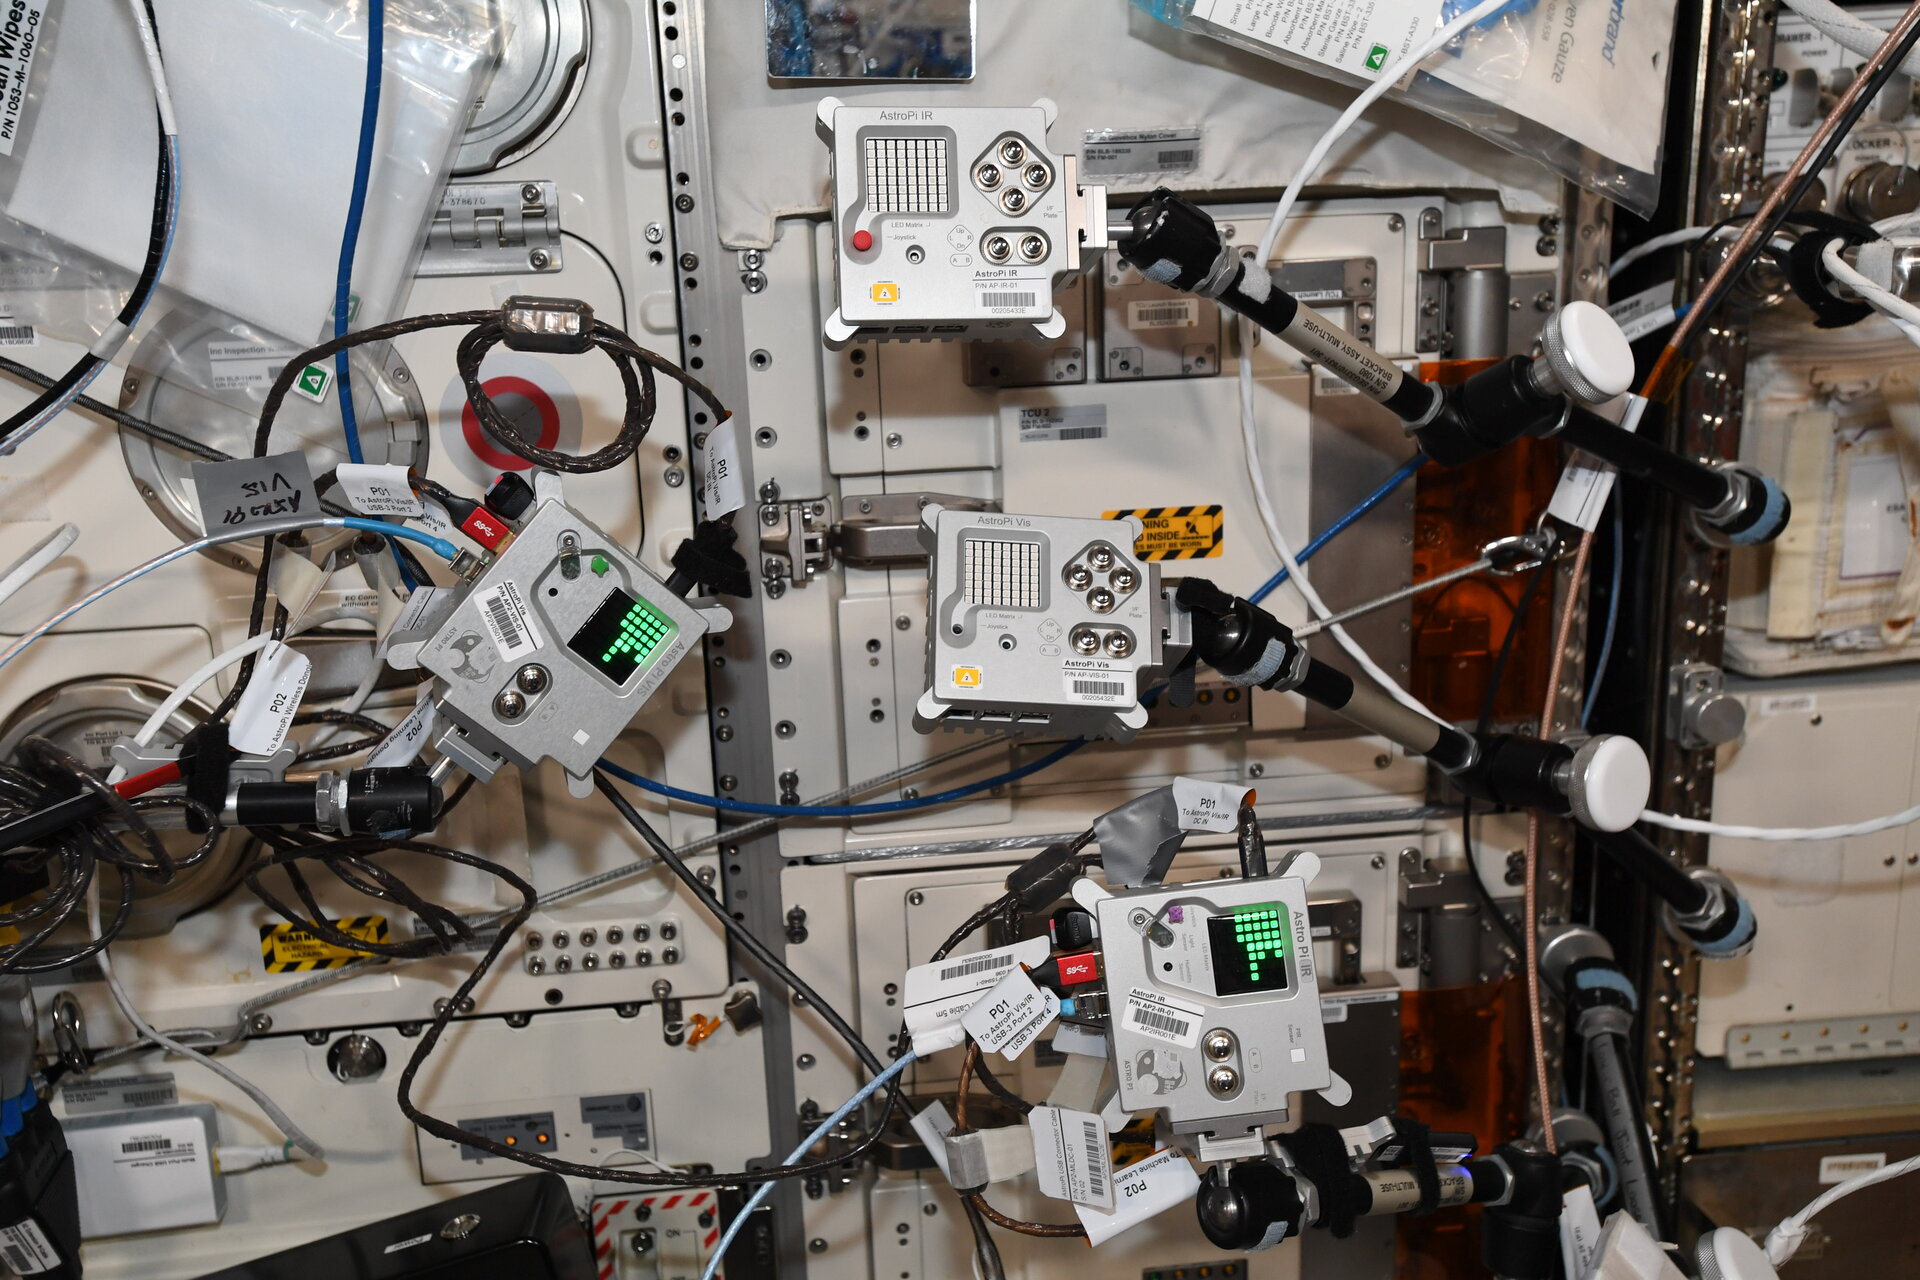 The two original Astro Pis with the new upgraded Astro Pis, together on the ISS